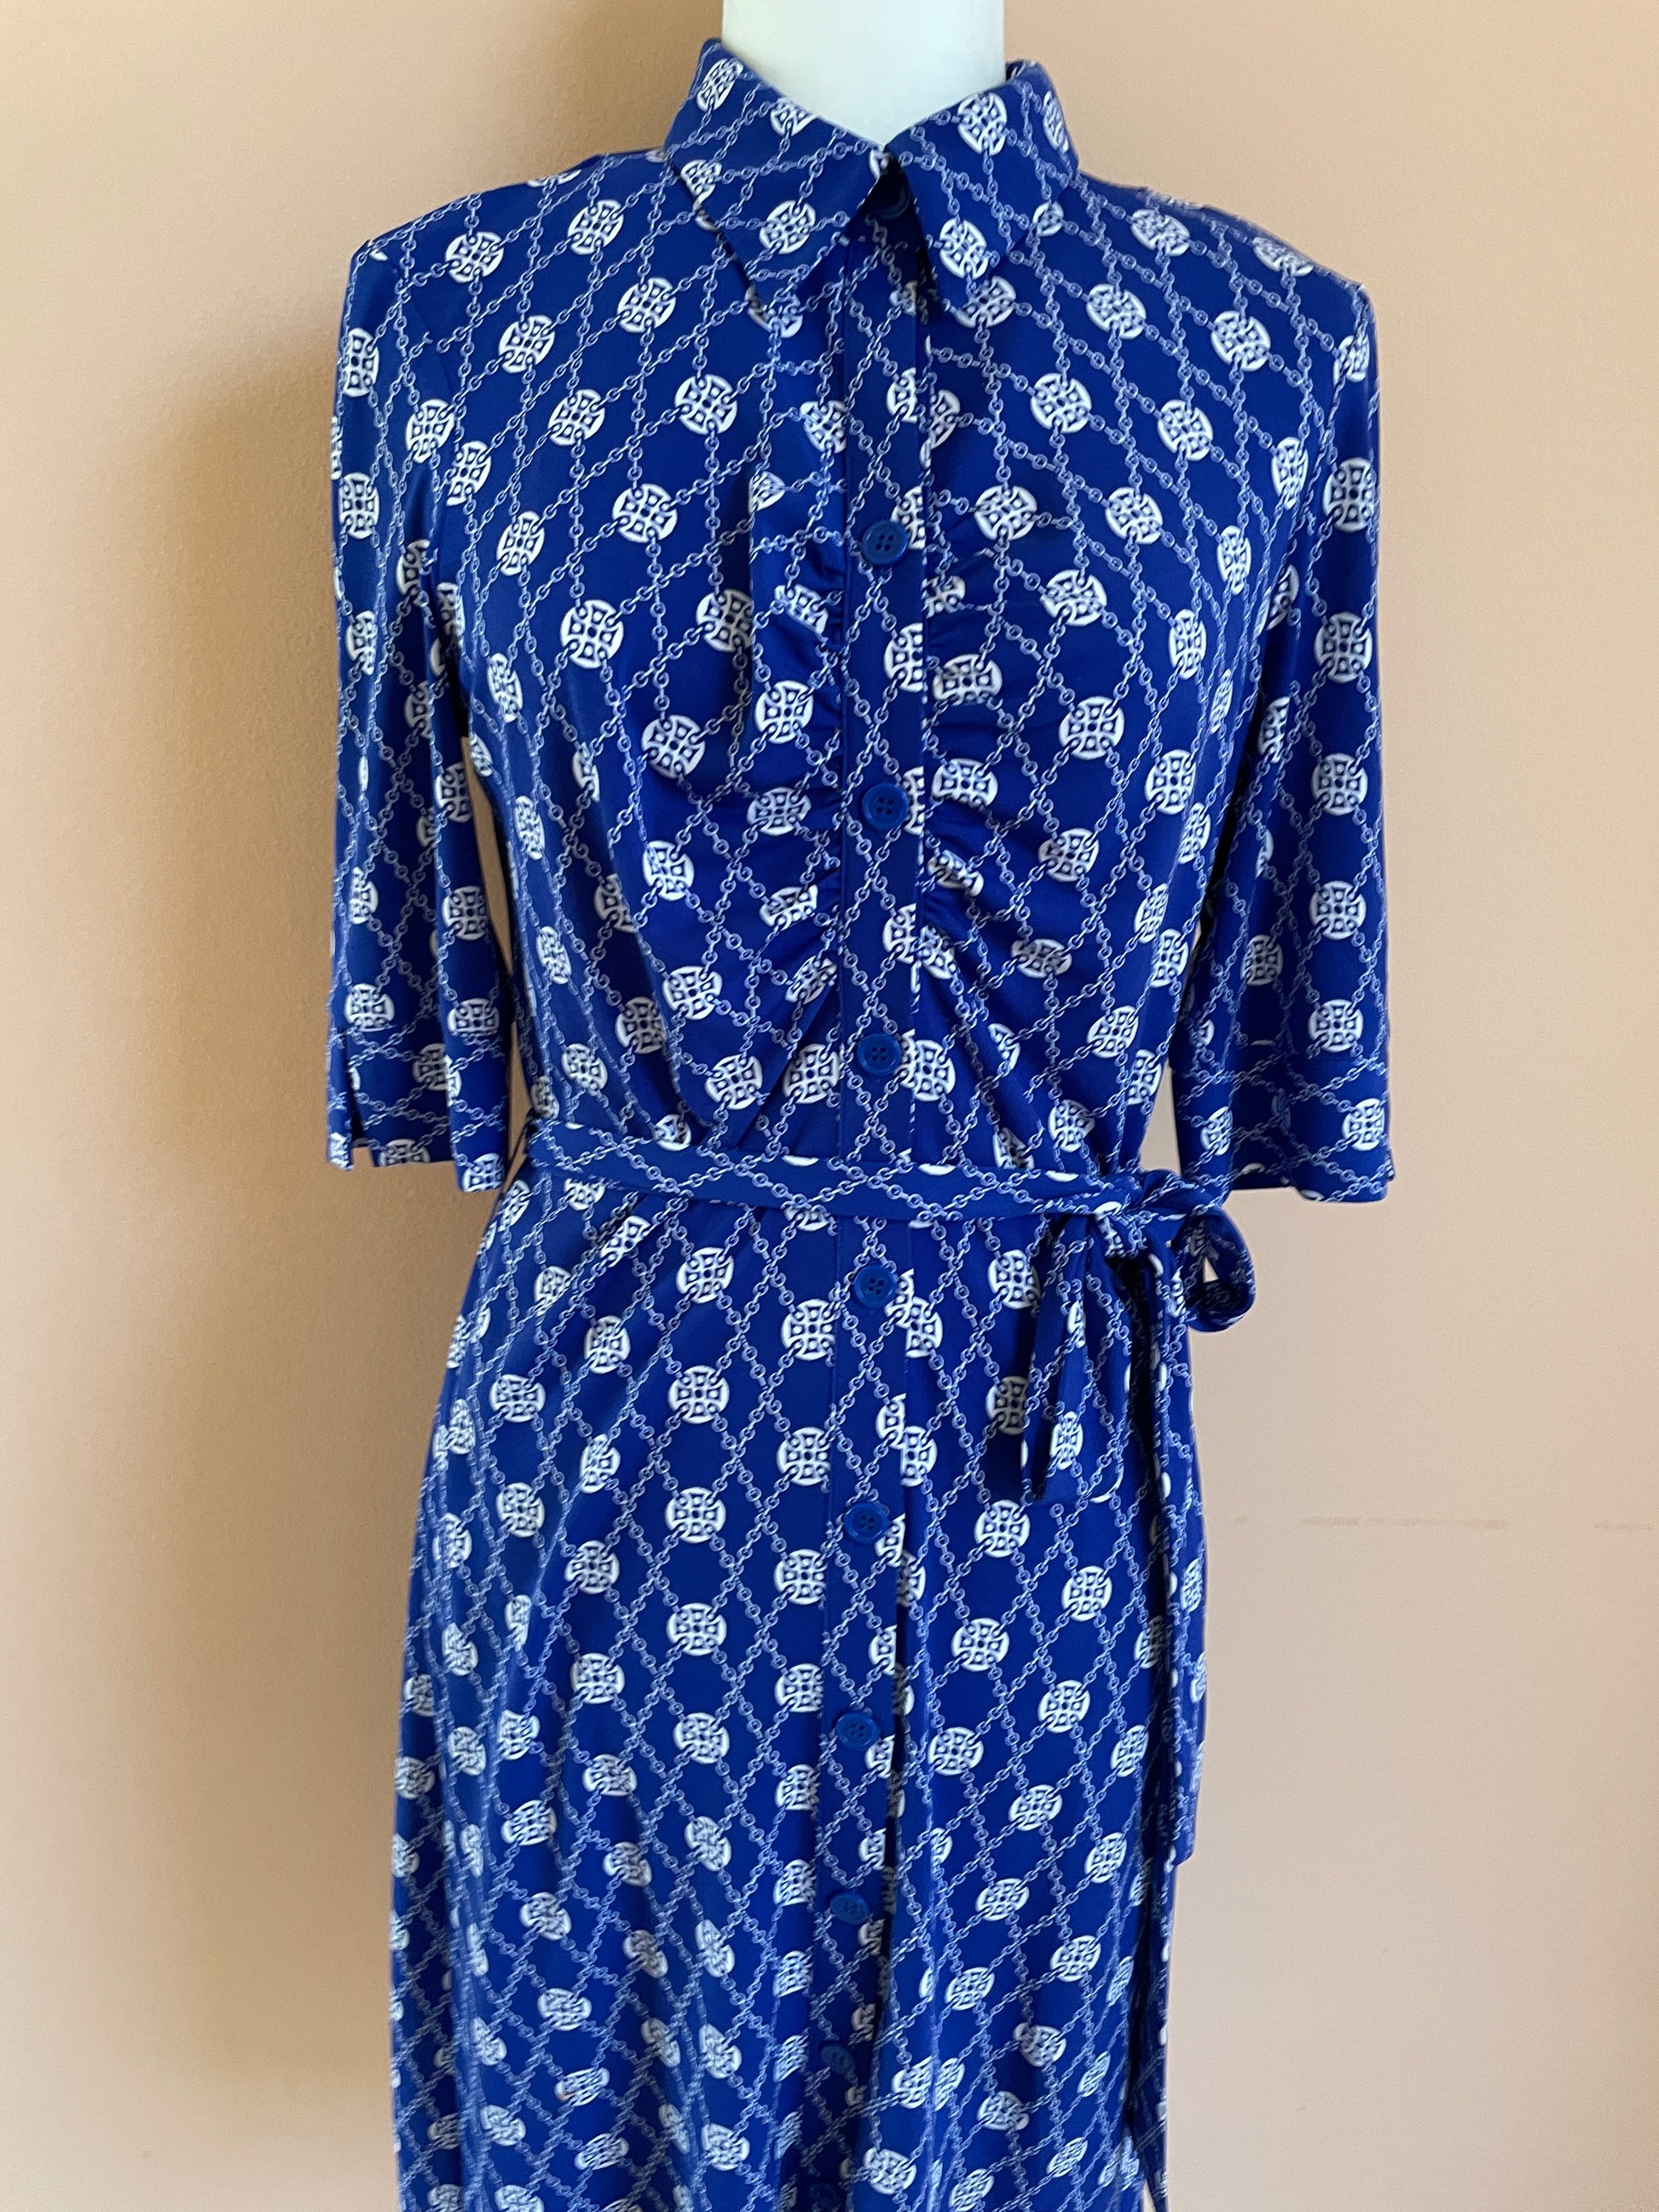  Laundry 2000s Chain Print Blue Poly Button Casual Day Dress